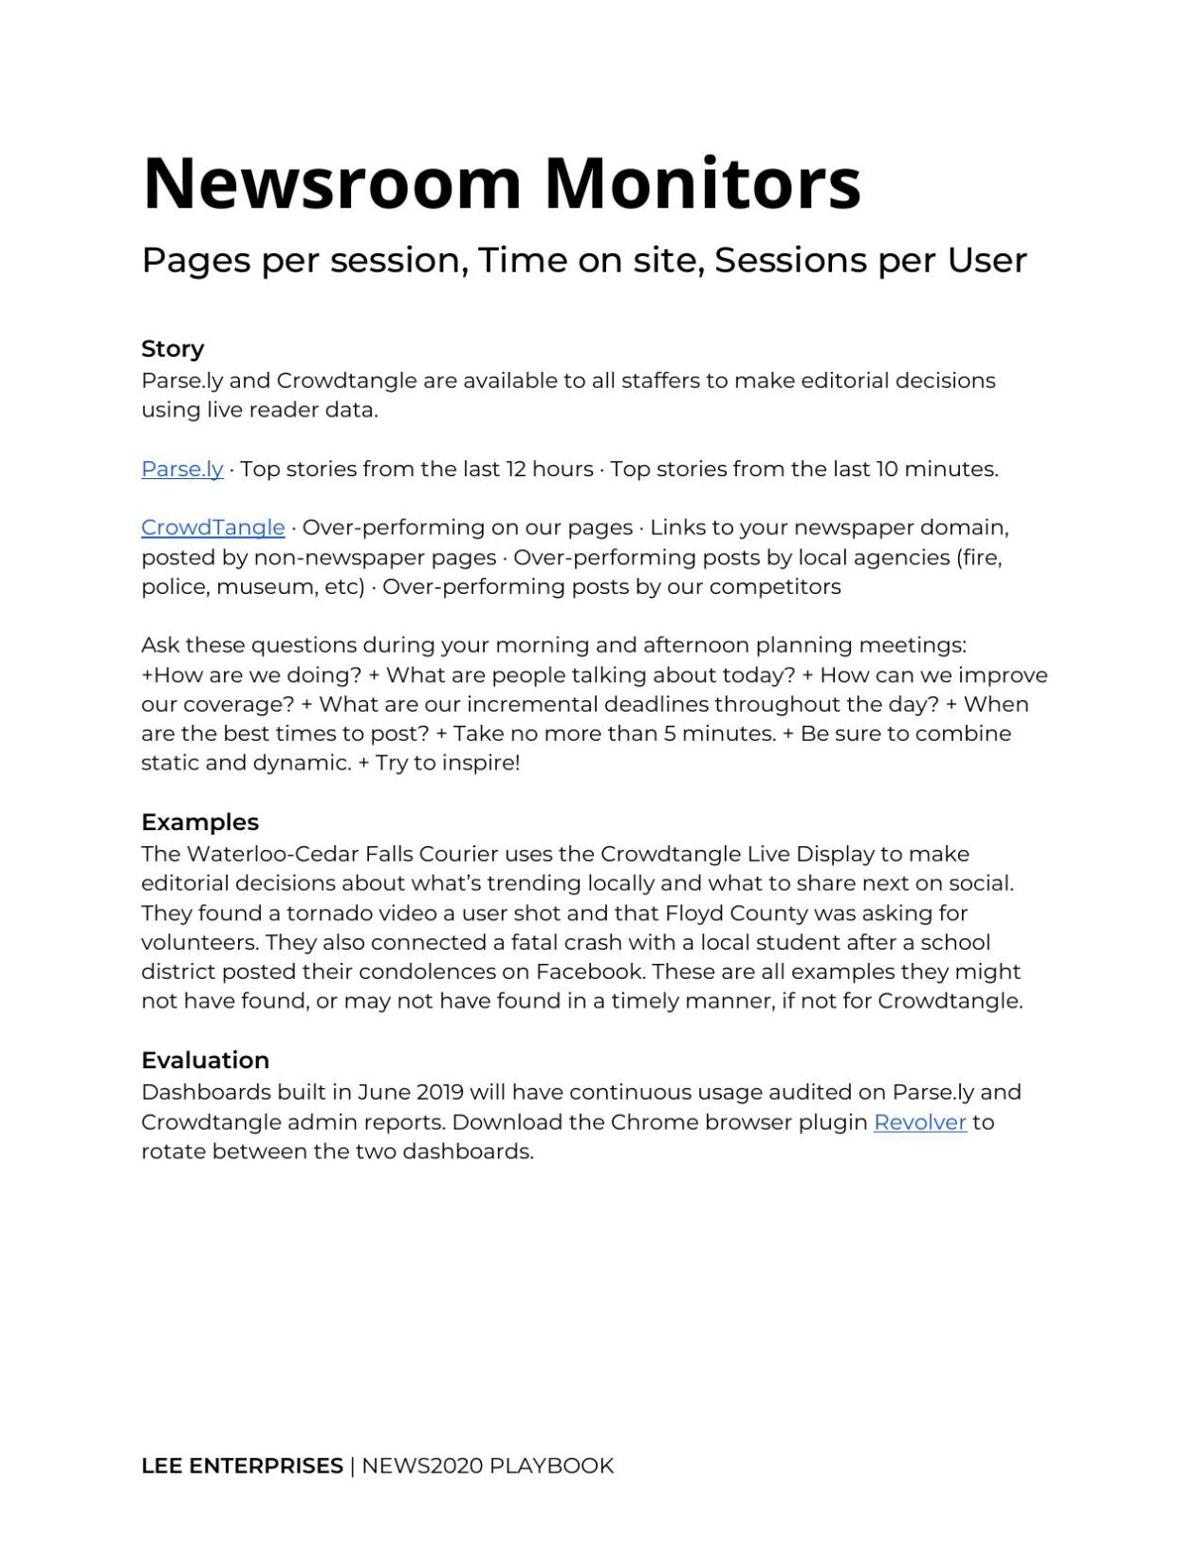 How to set up and use newsroom monitors